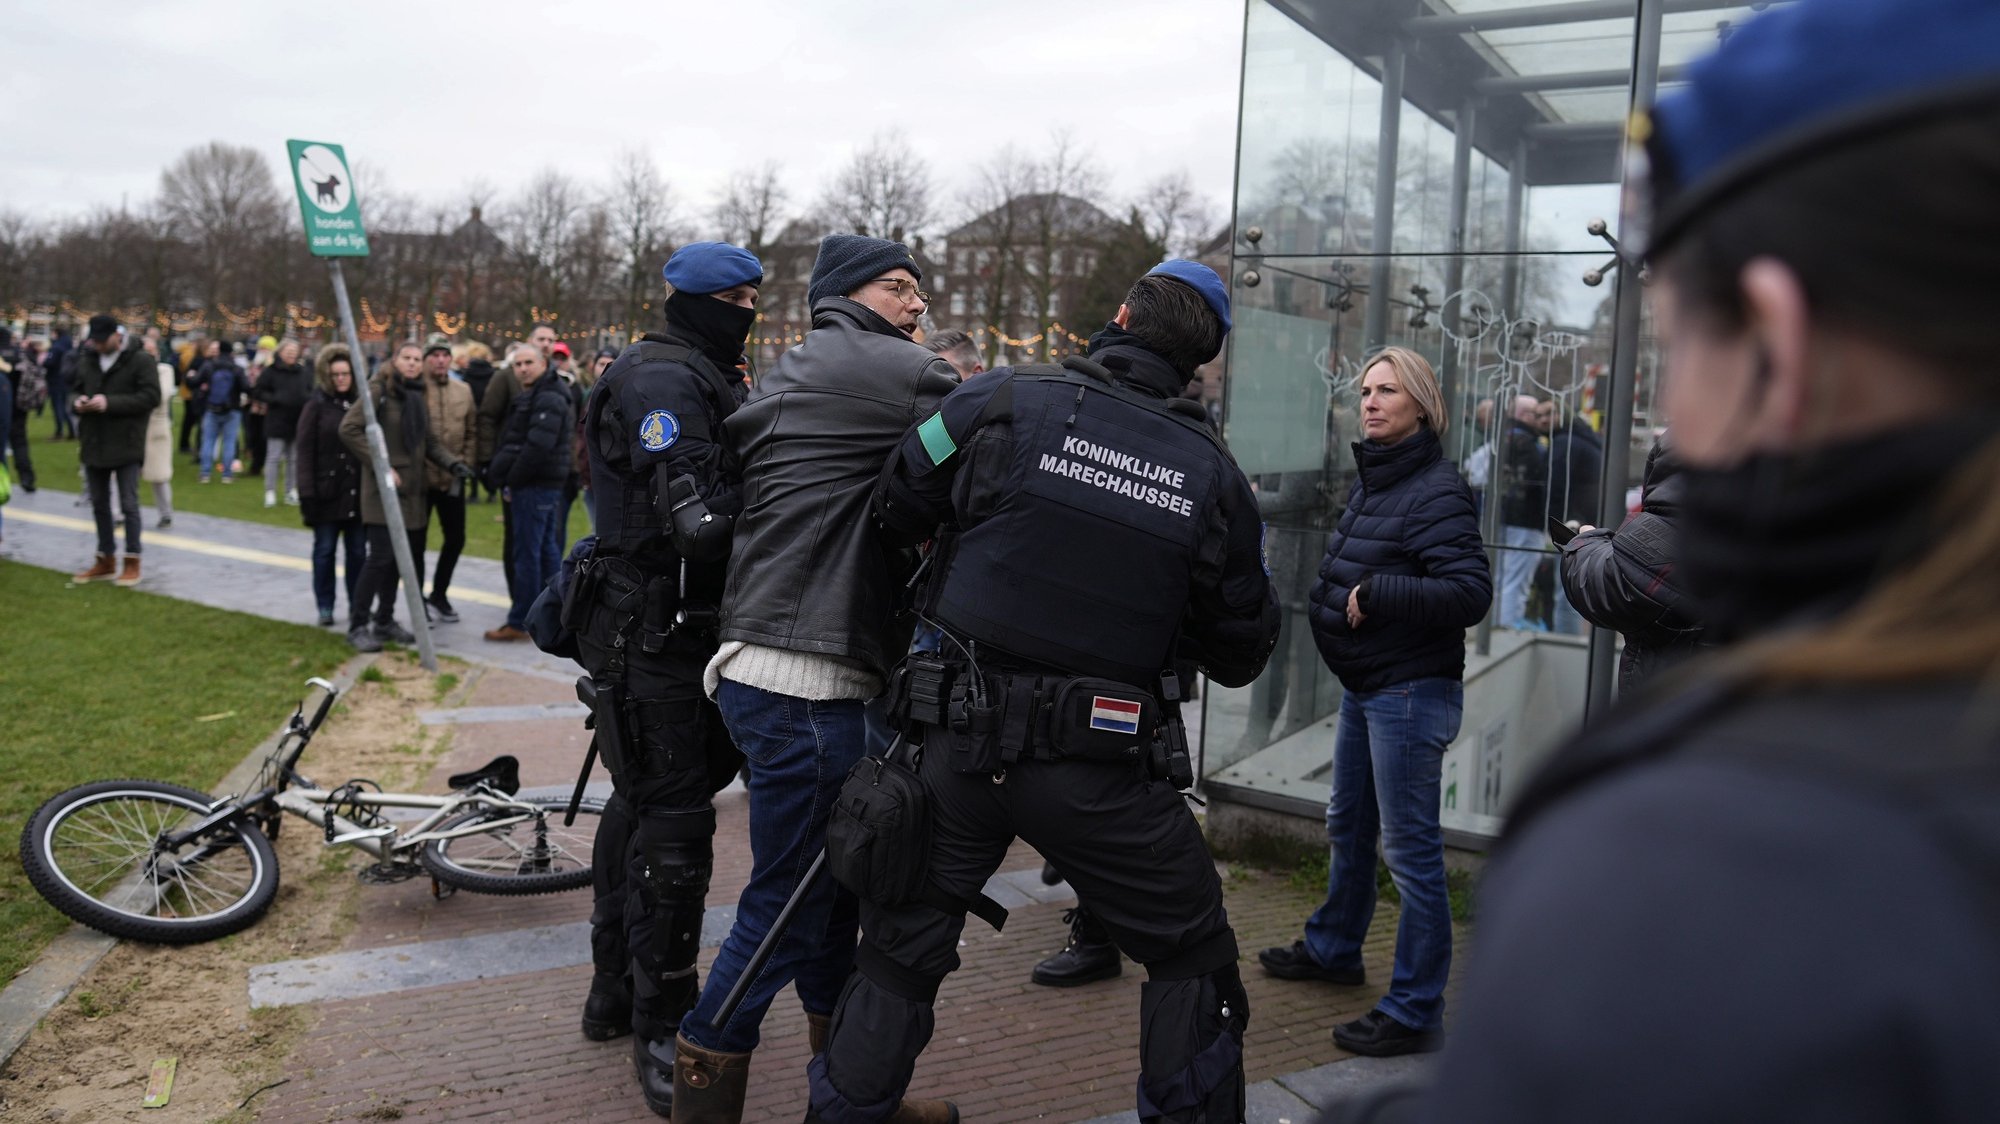 epa09663743 Dutch national police detains a protester as people gathered at the Museumplein to demonstrate against the government-imposed lockdown measures to curb the spread of the Sars-CoV-2 coronavirus, despite the municipality&#039;s ban on a demonstration of Samen voor Nederland (Together for the Netherlands) in Amsterdam, Netherlands, 02 January 2022. Dutch authorities have previously sent out an urgent appeal to Samen voor Nederland (Together for the Netherlands) and demonstrators not to come to Amsterdam, otherwise security forces will be forced to intervene. The Netherlands enforced a hard lockdown from 19 December 2021 until at least 14 January 2022 to curb the rapid spread of the Omicron variant of SARS-CoV-2.  EPA/PHIL NIJHUIS